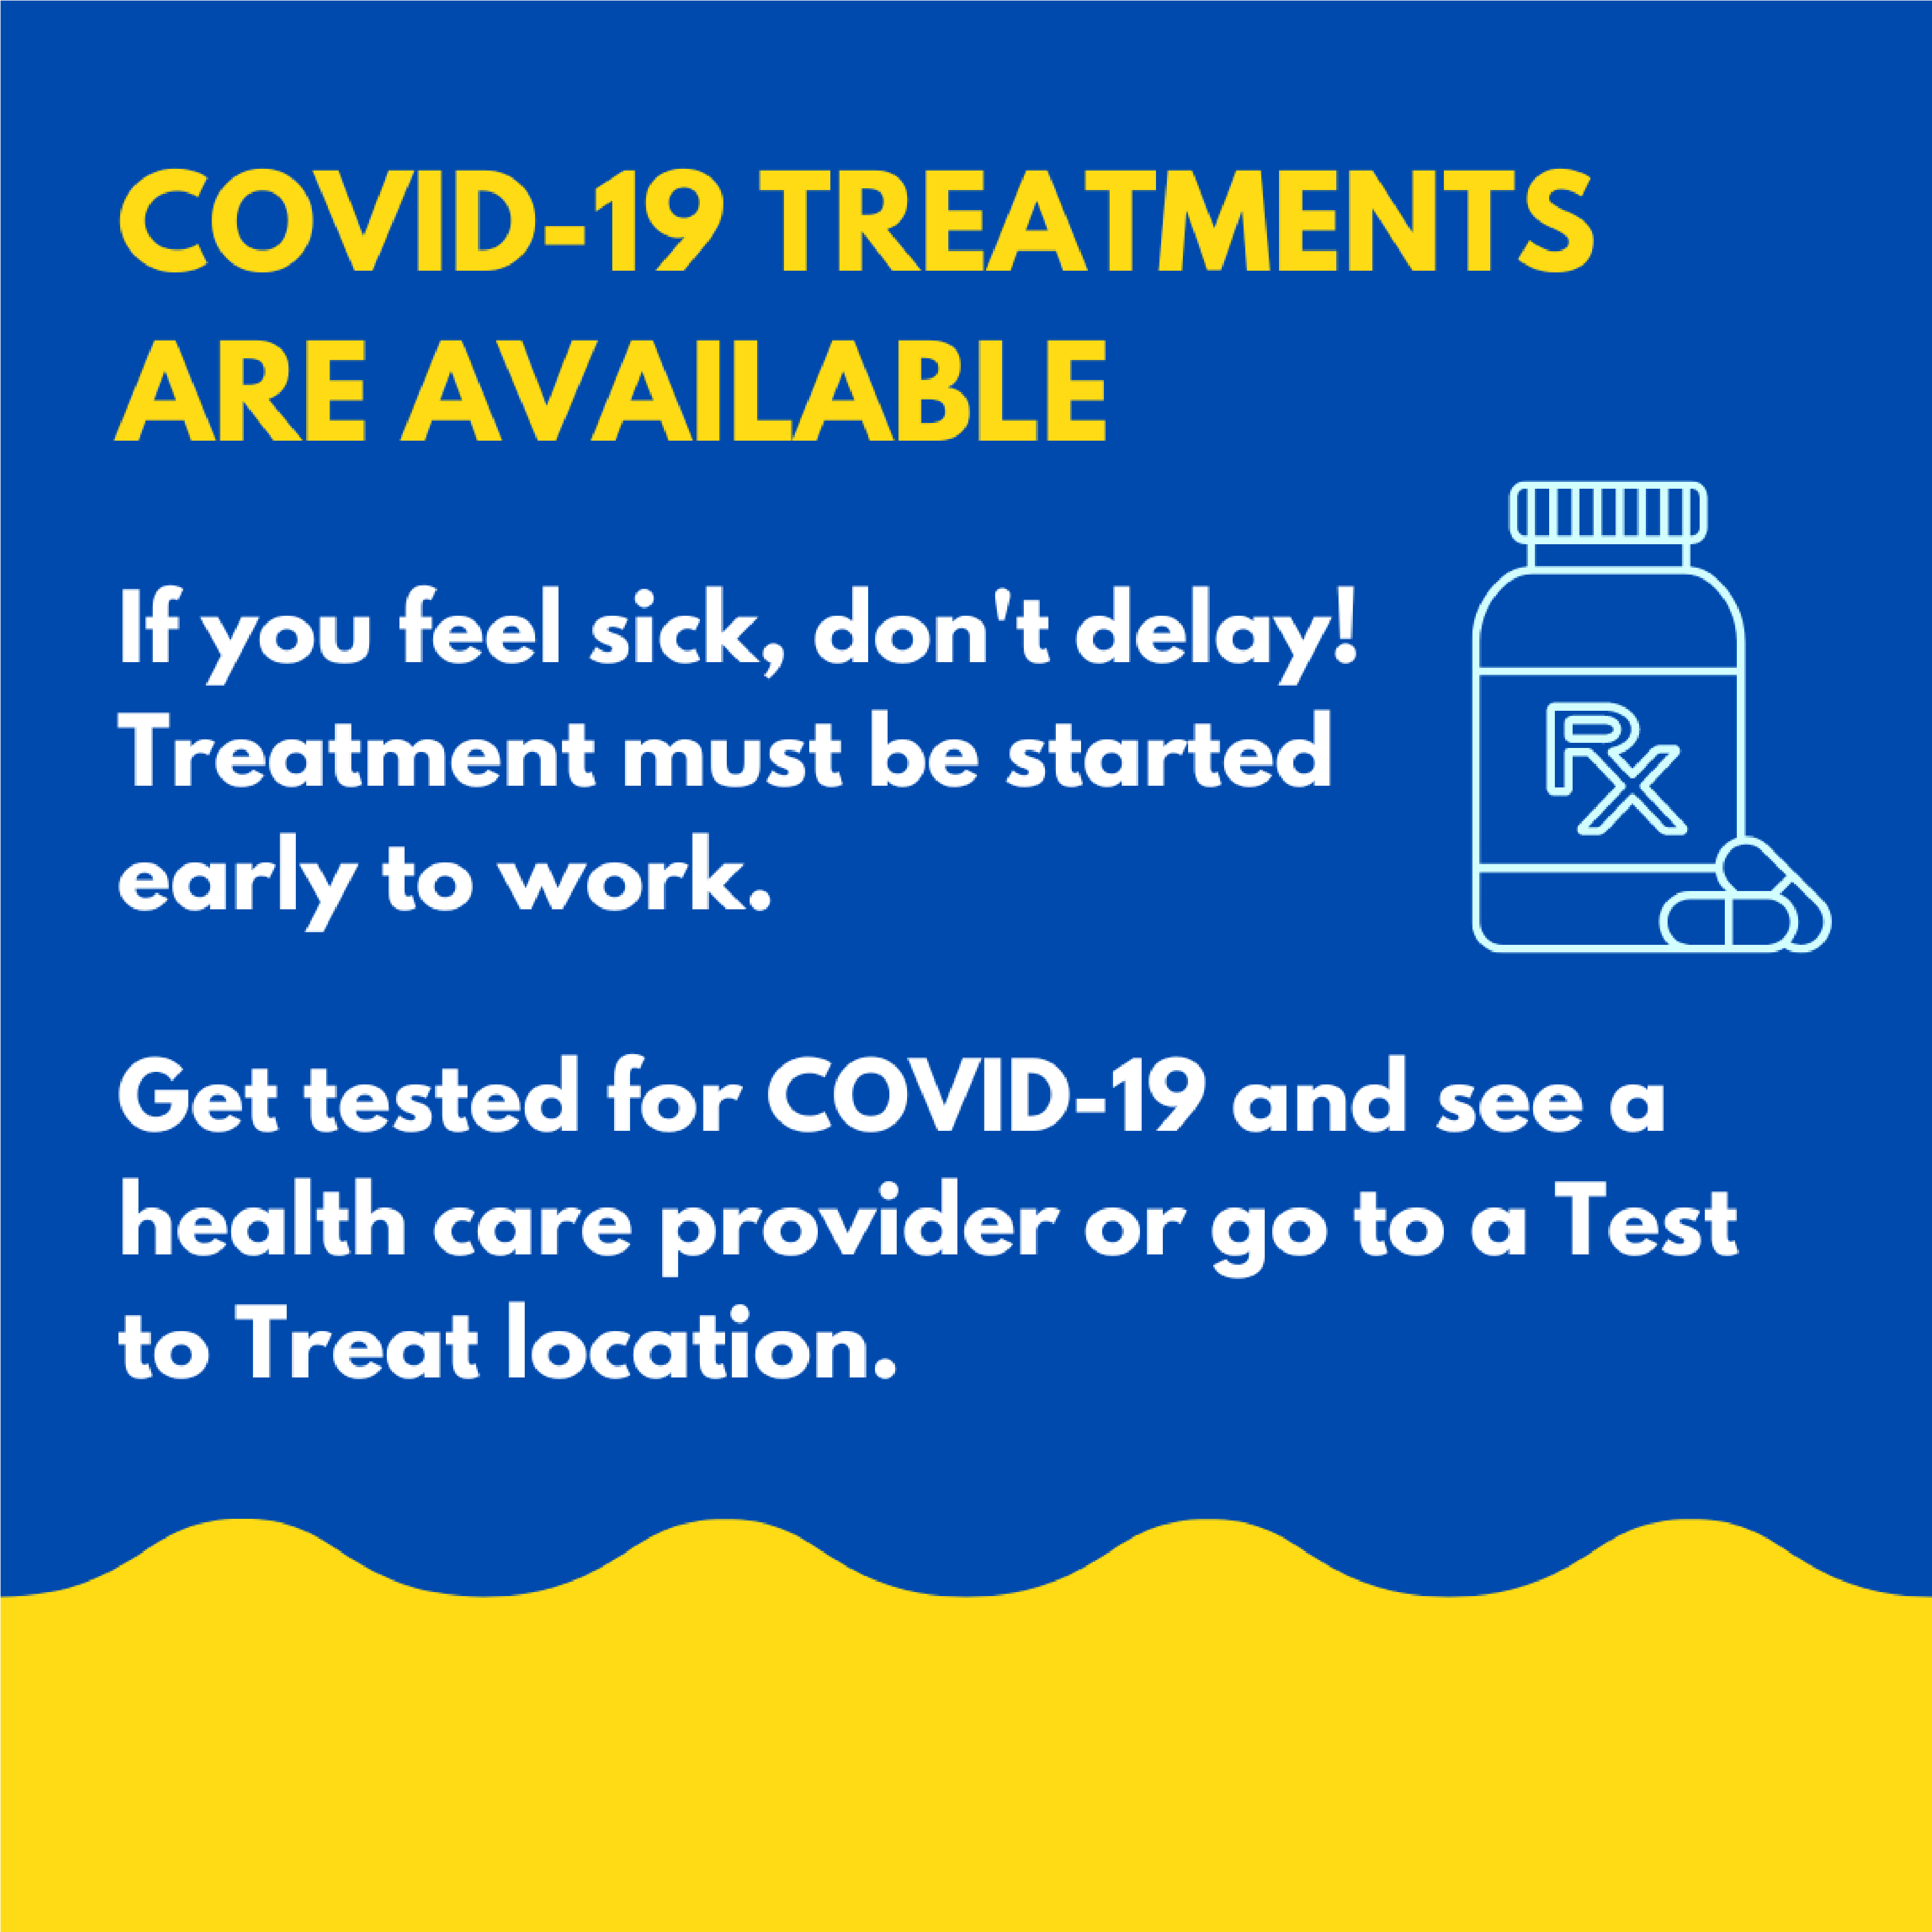 COVID19 Treatments are available